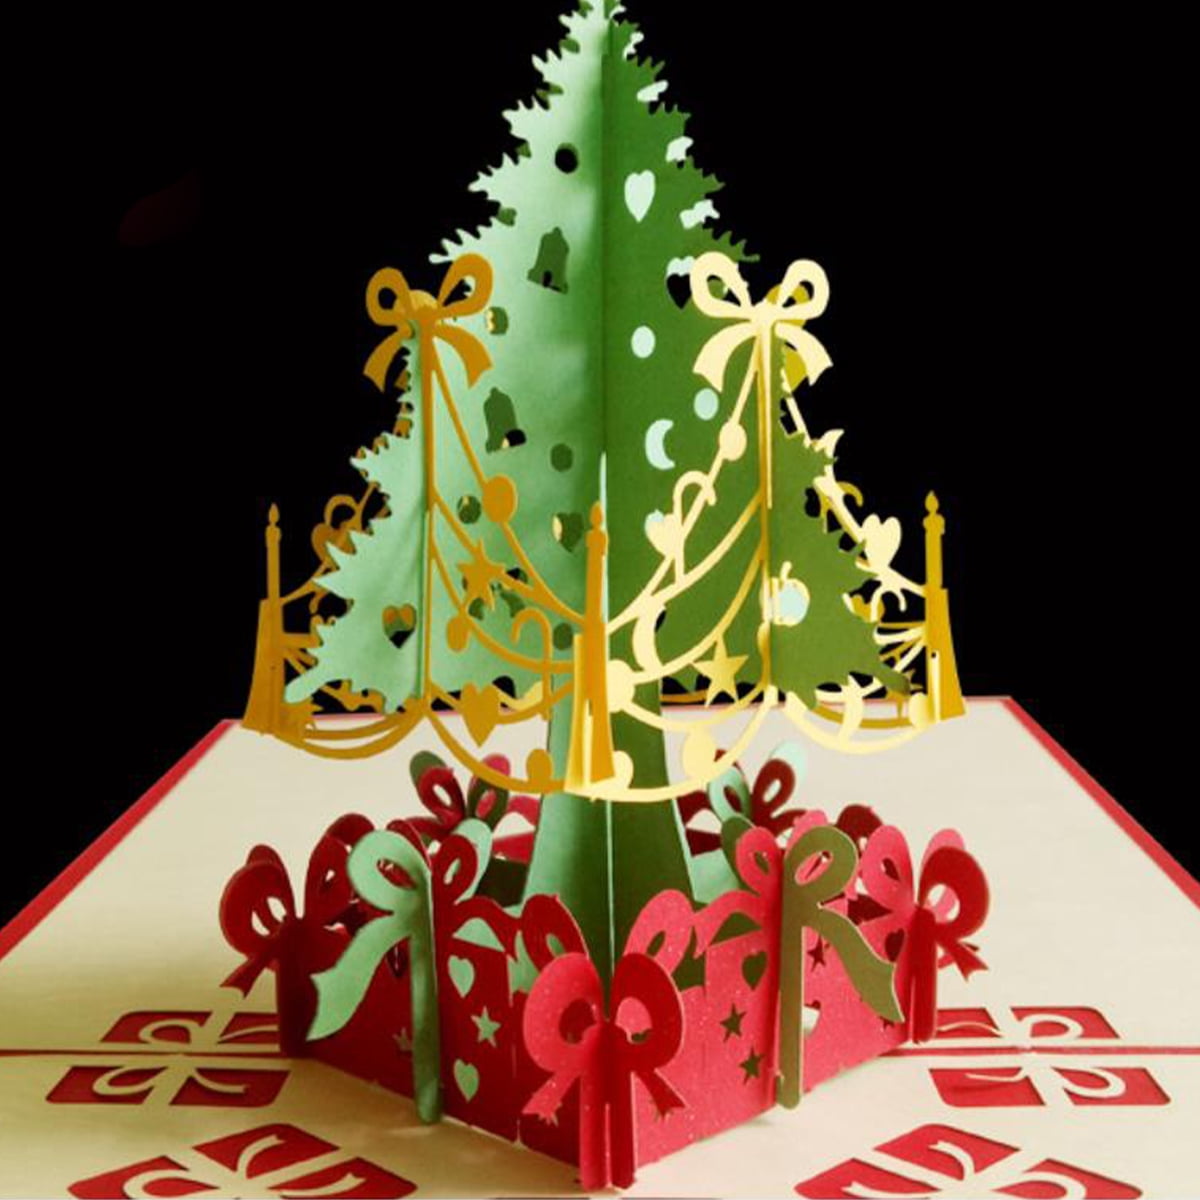 Details about   New  Hallmark Christmas Holiday Card Christmas Tree And Candy Canes Set of 16 